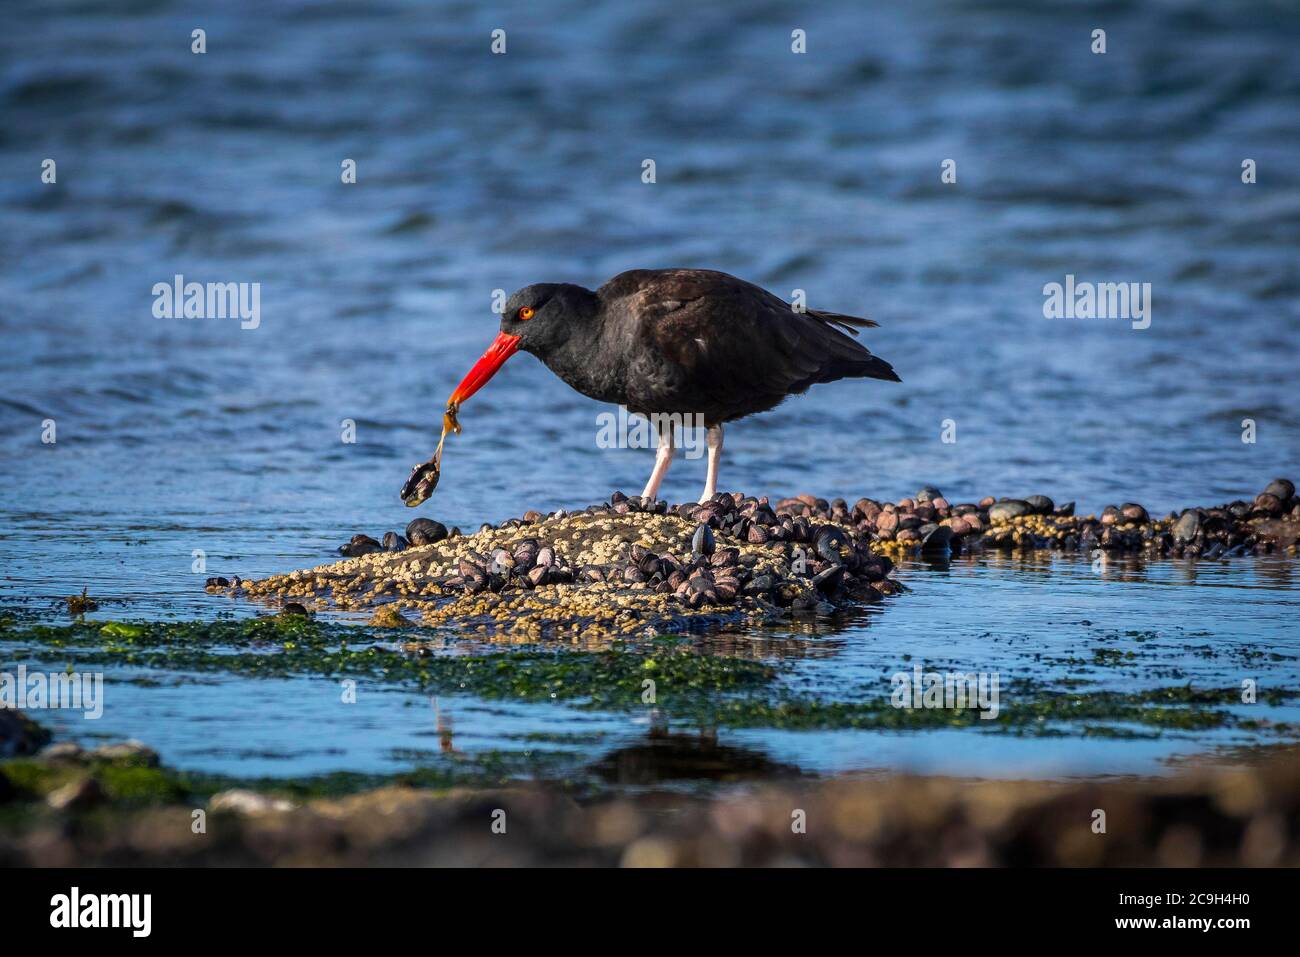 Blackish Oystercatcher (Haematopus ater) eats at a mussel, Saunders Island, Falkland Islands, Great Britain Stock Photo